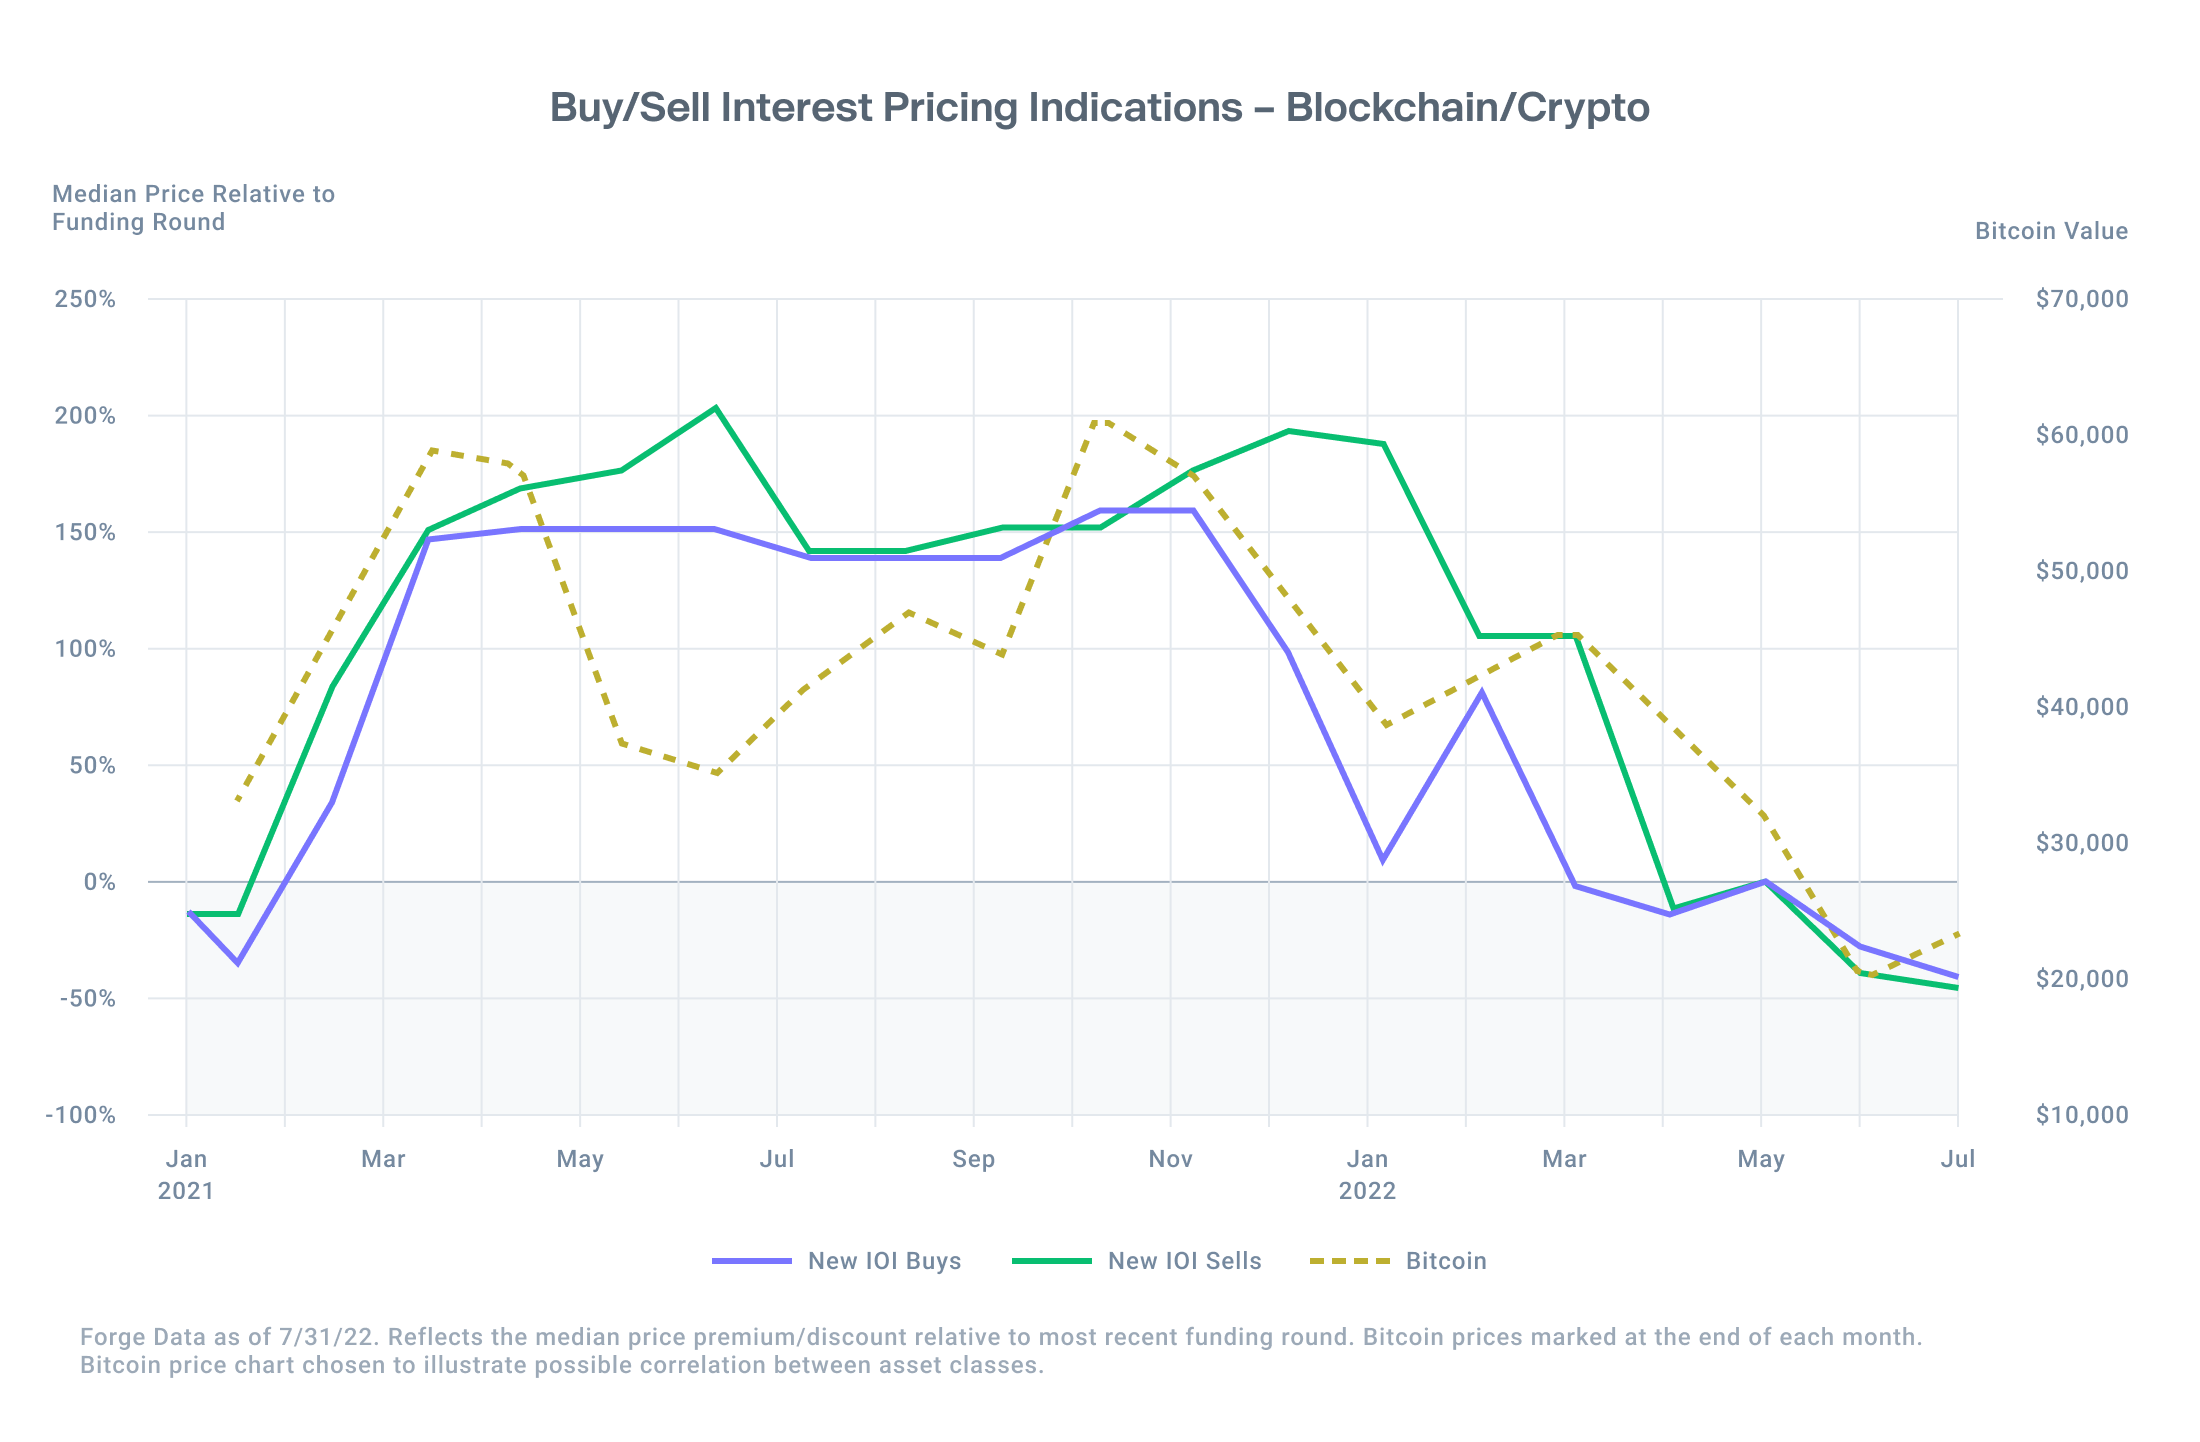 Buy/sell pricing indications for blockchain/crypto